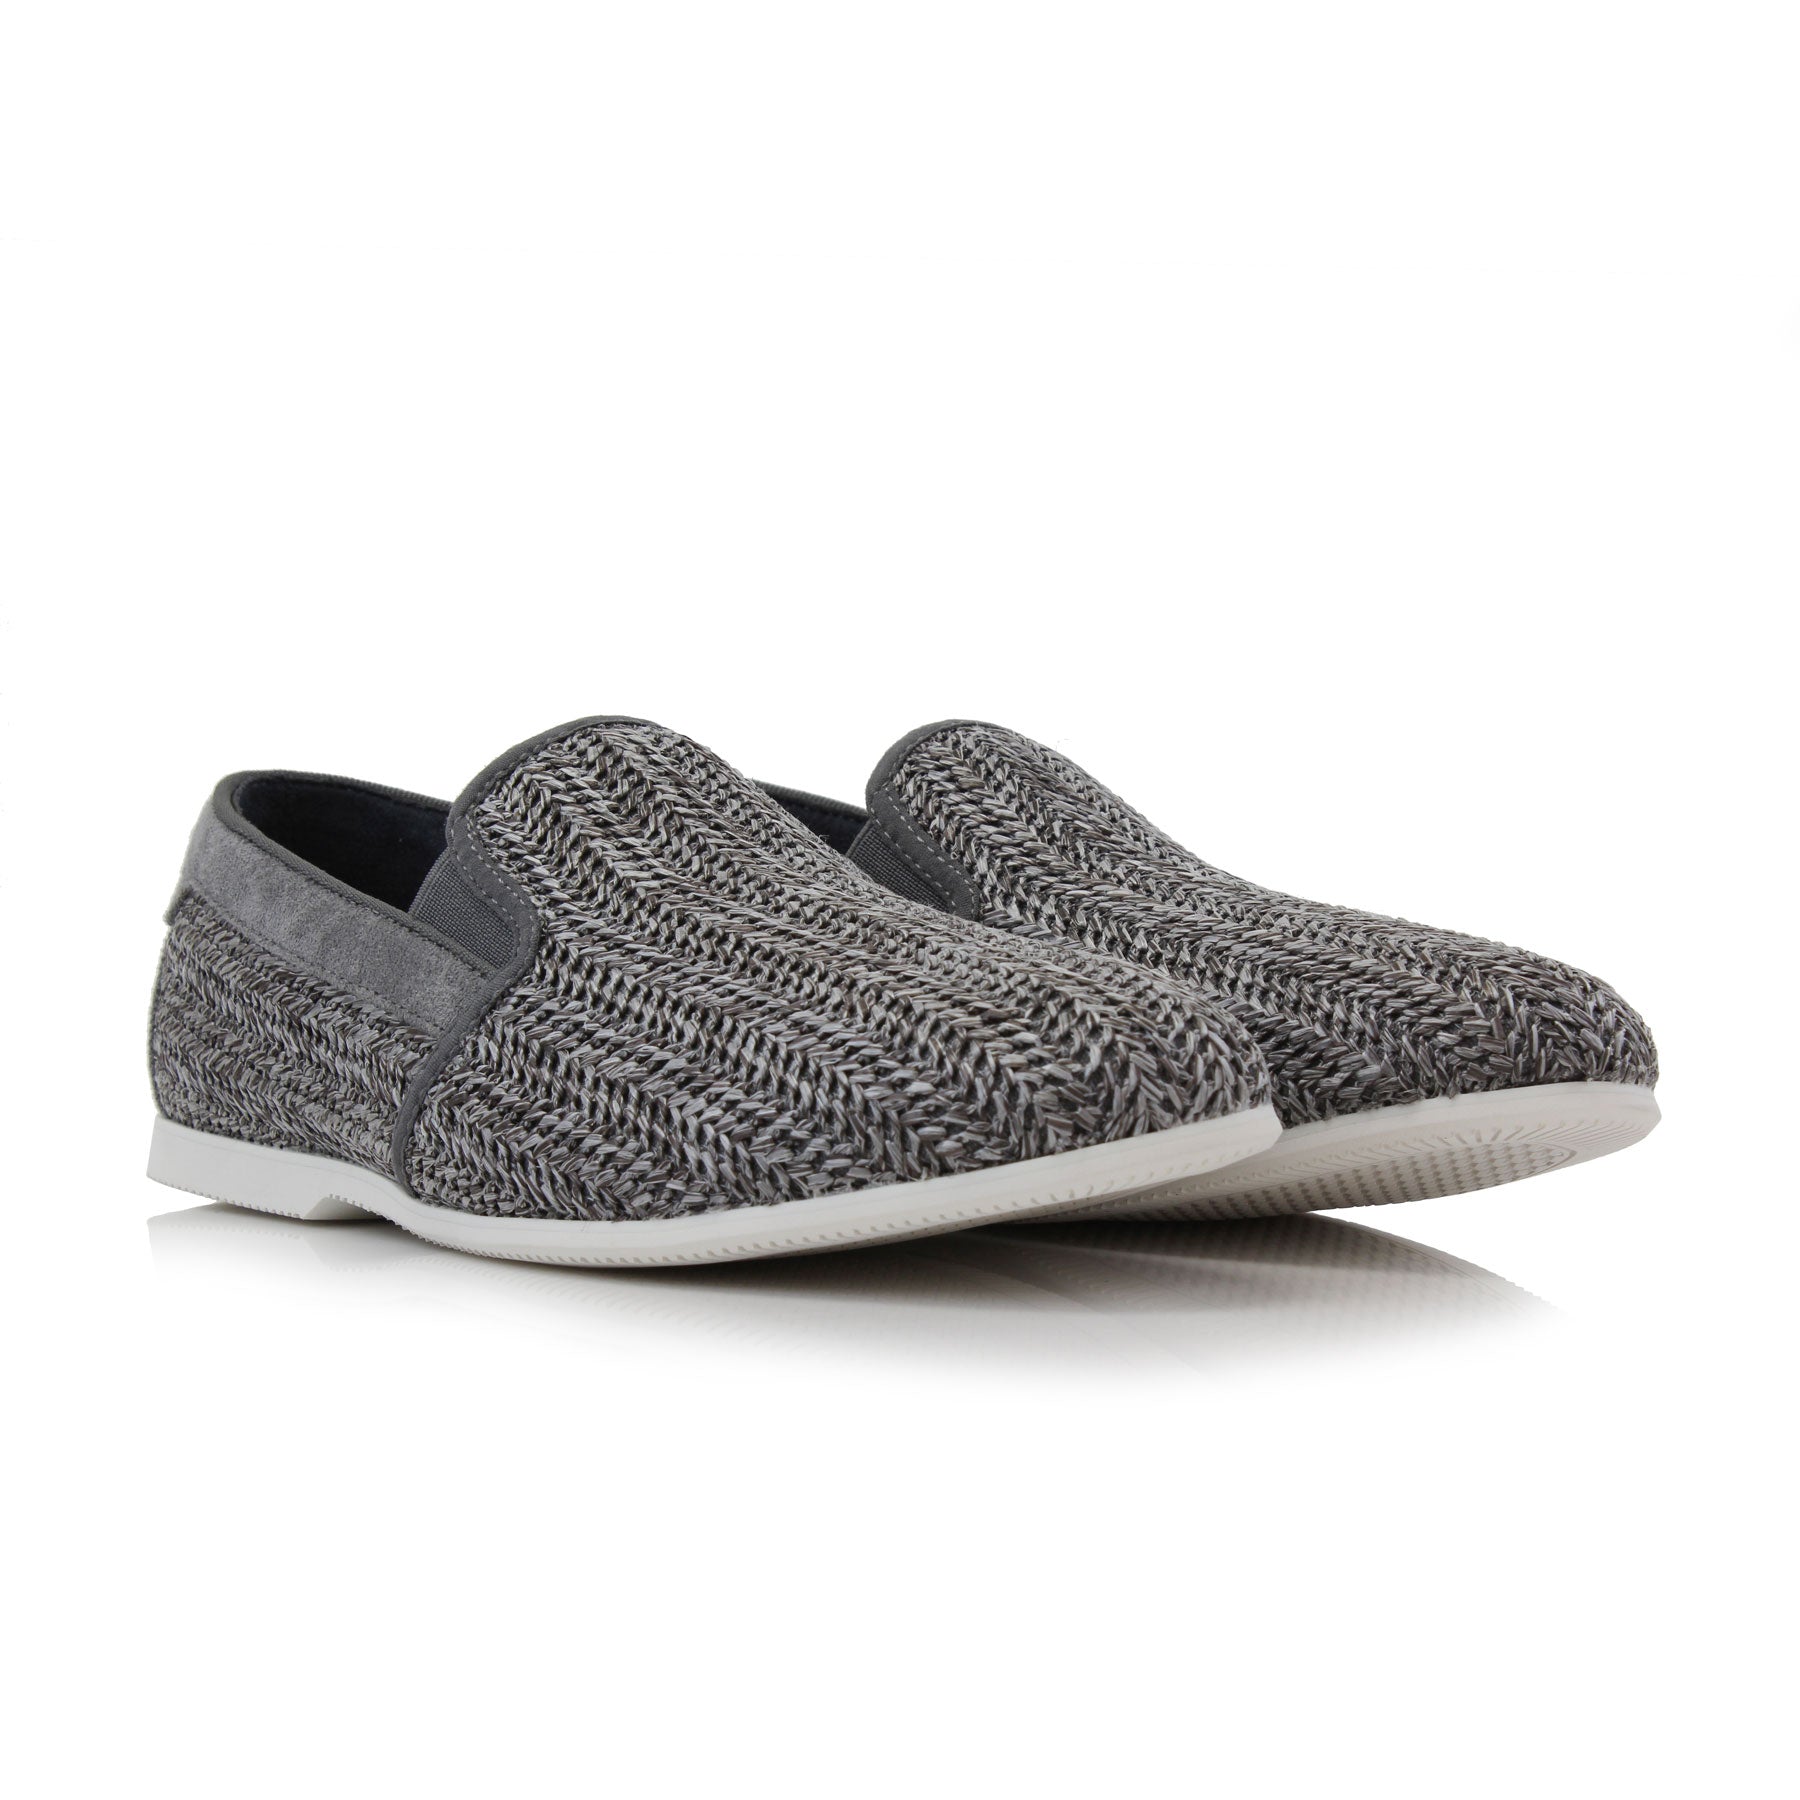 Woven Loafers | Jiro by Ferro Aldo | Conal Footwear | Paired Angle View